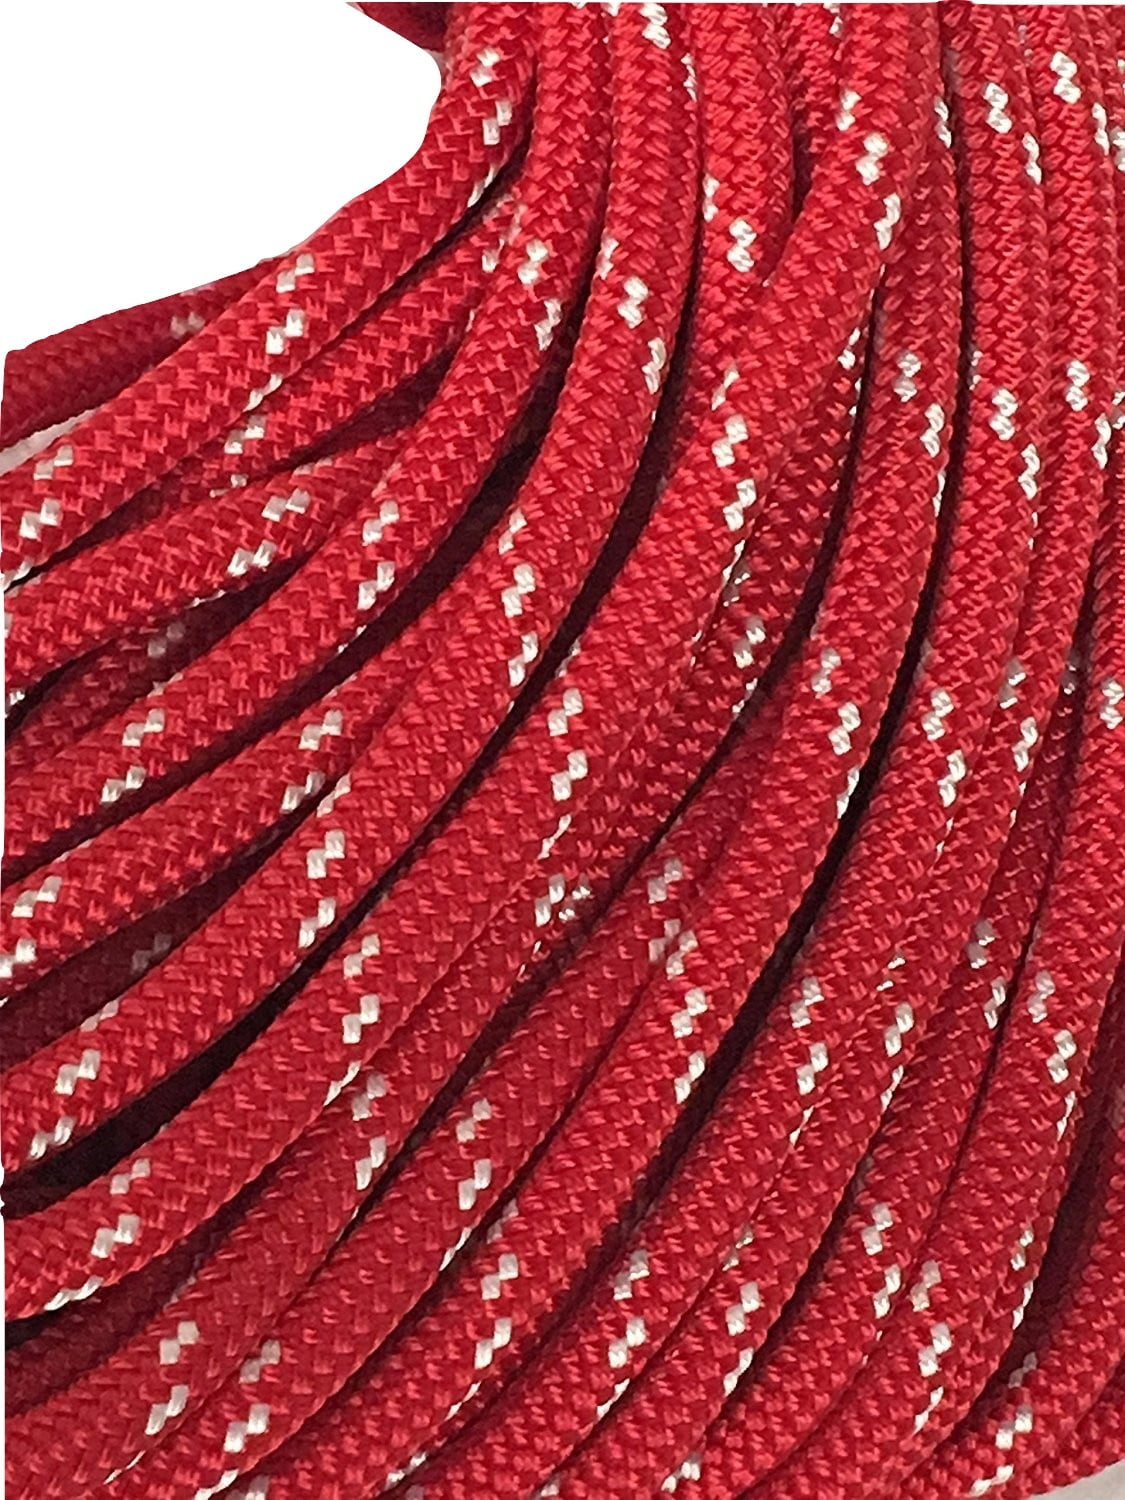 Double Braid~Yacht Braid Polyester rope.Made in USA. 5/16 " x 100 ft 